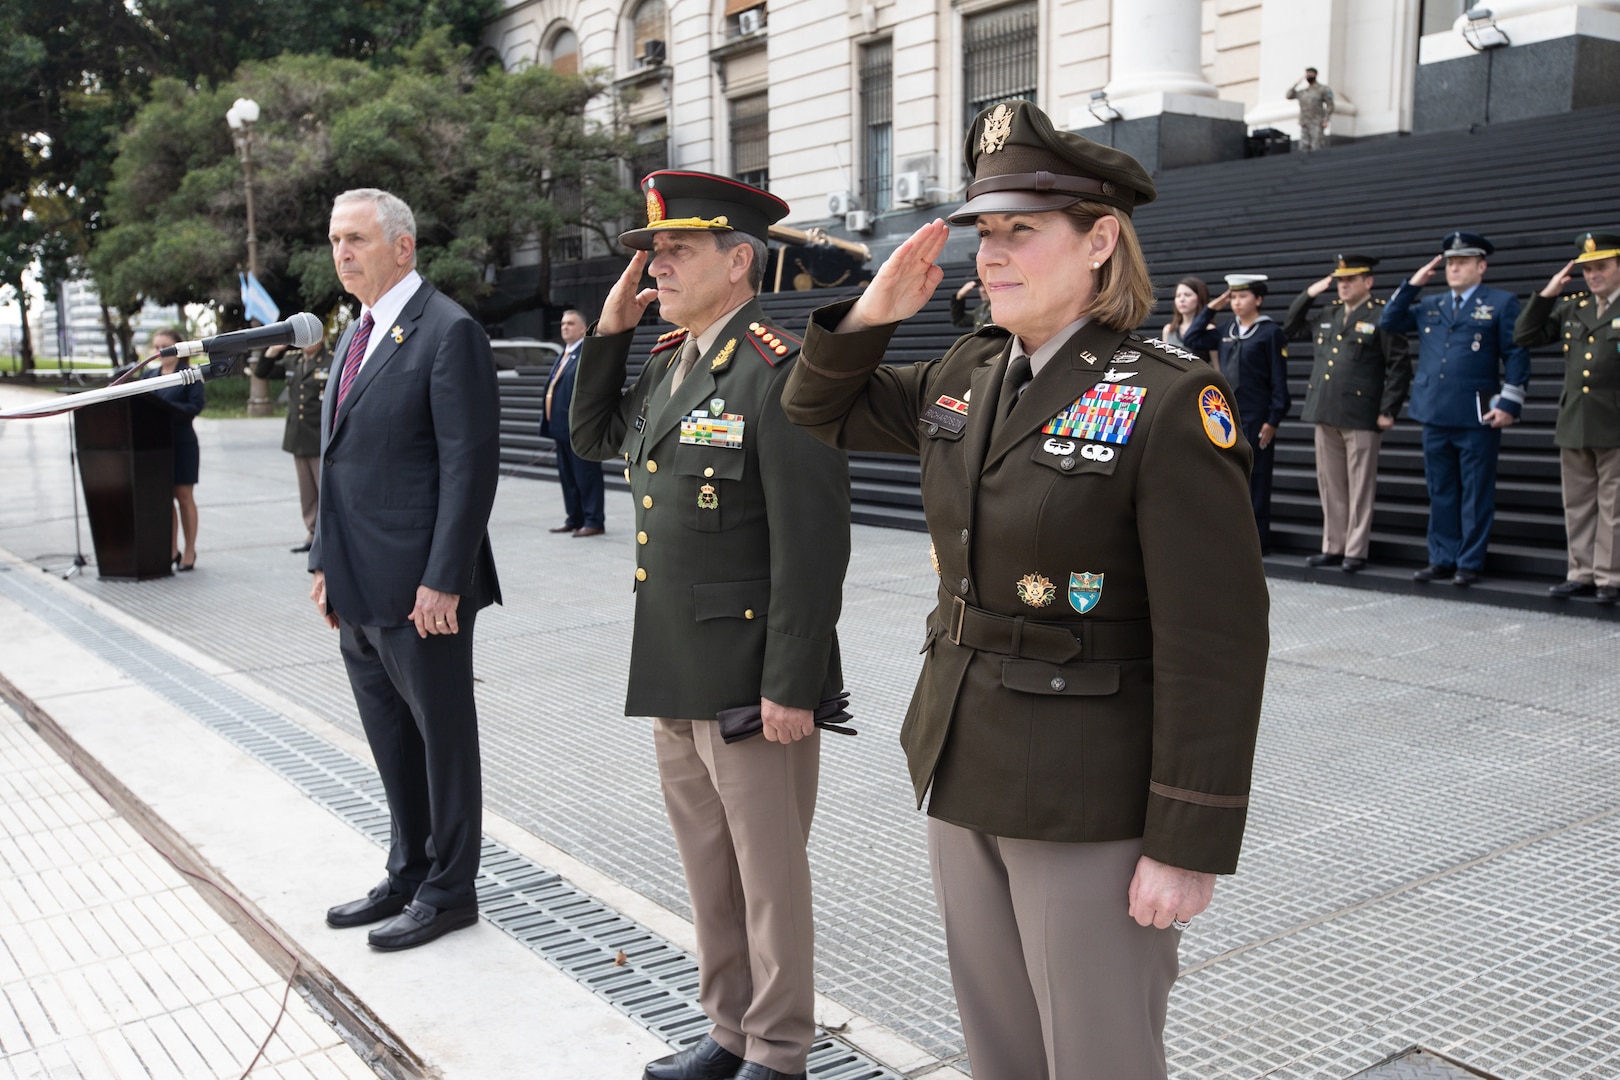 The commander of U.S. Southern Command, Army Gen. Laura Richardson, and Argentine Armed Forces Joint Command Chief Lt. Gen. Juan Martín Paleo, arrive at the Argentine Ministry of Defense.